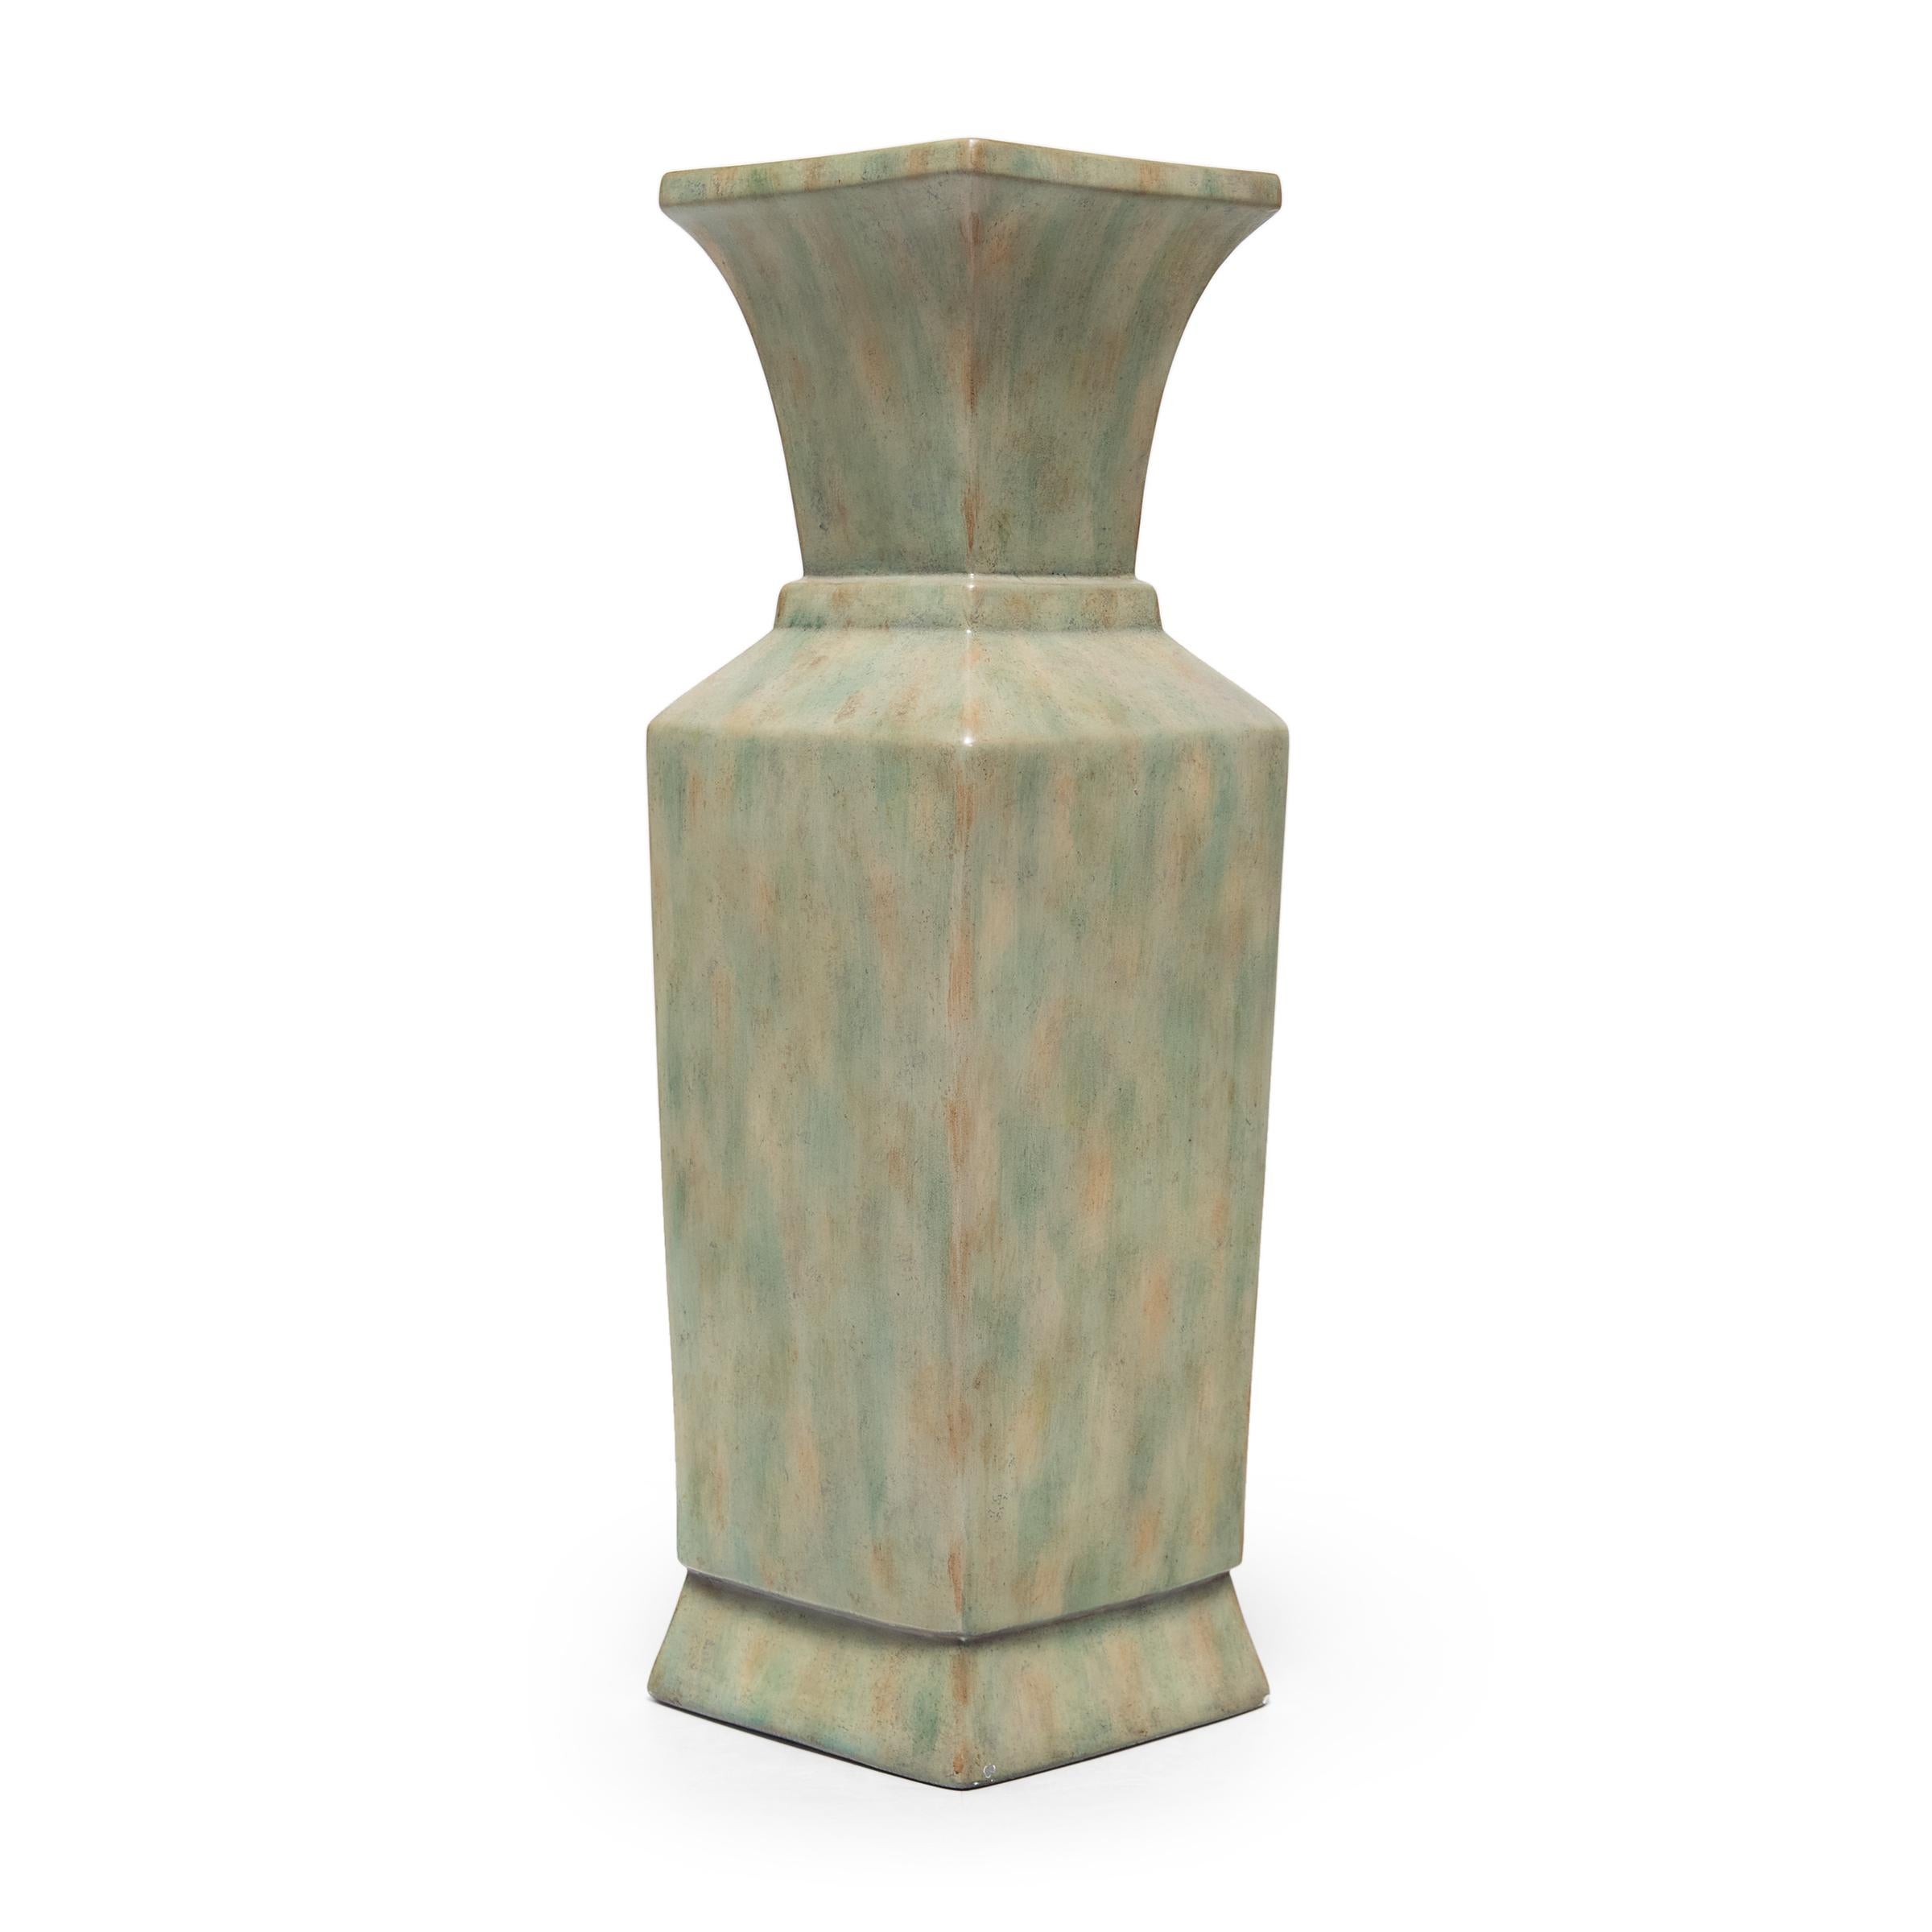 A contemporary iteration of the classic Chinese phoenix-tail vase form, this tall porcelain urn by interior design house Maitland-Smith features a square body with angular shoulders and a flared top. A mottled glaze coats the exterior in a palette